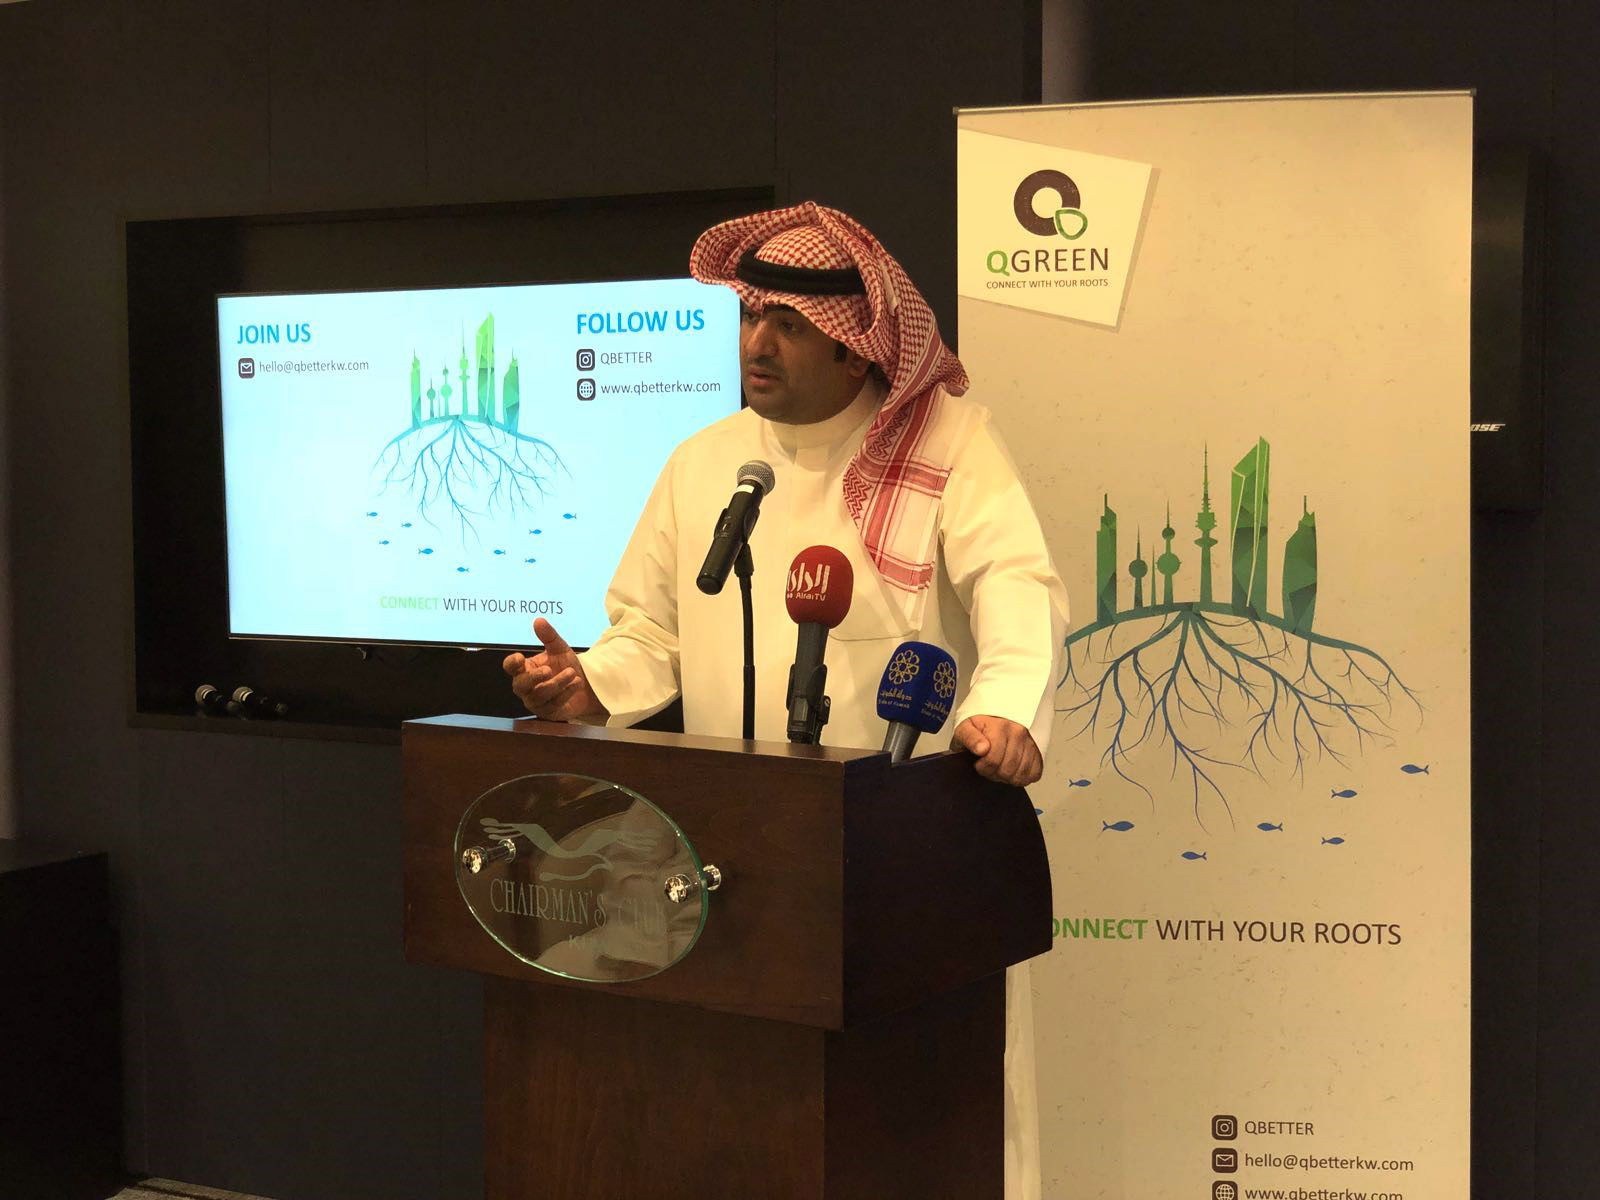 Kuwait Minister of Commerce and Industry Khaled Al-Roudhan speaks during the launch of an initiative by Qbetter company to achieve sustainable food security